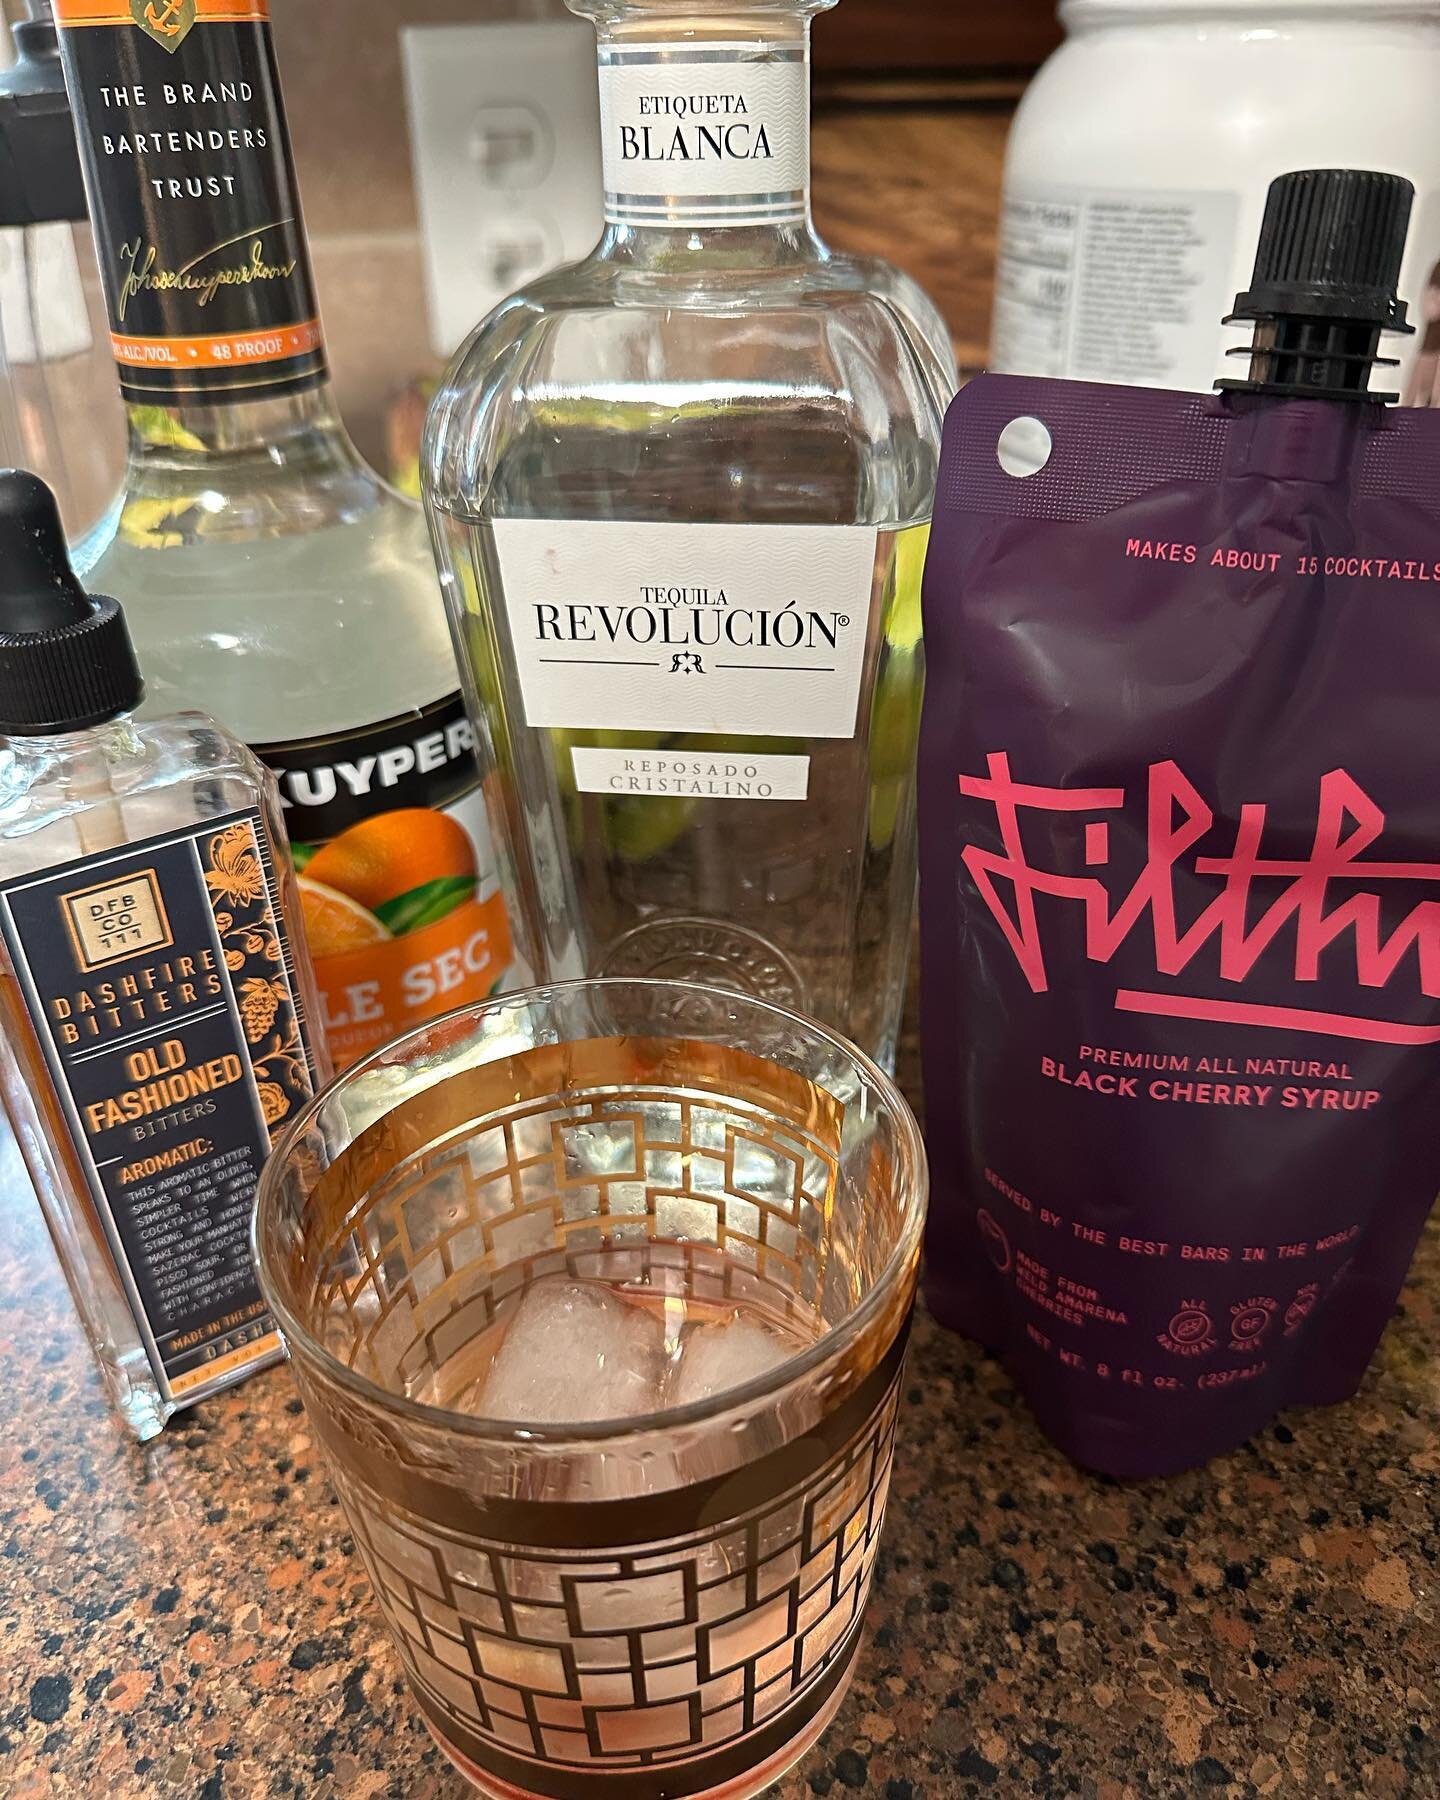 Happy Cinco de Mayo! This mix actually worked out well. Cheers #cincodemayo #tequila  @filthyfoods @dashfirebitters @revoluciontequila